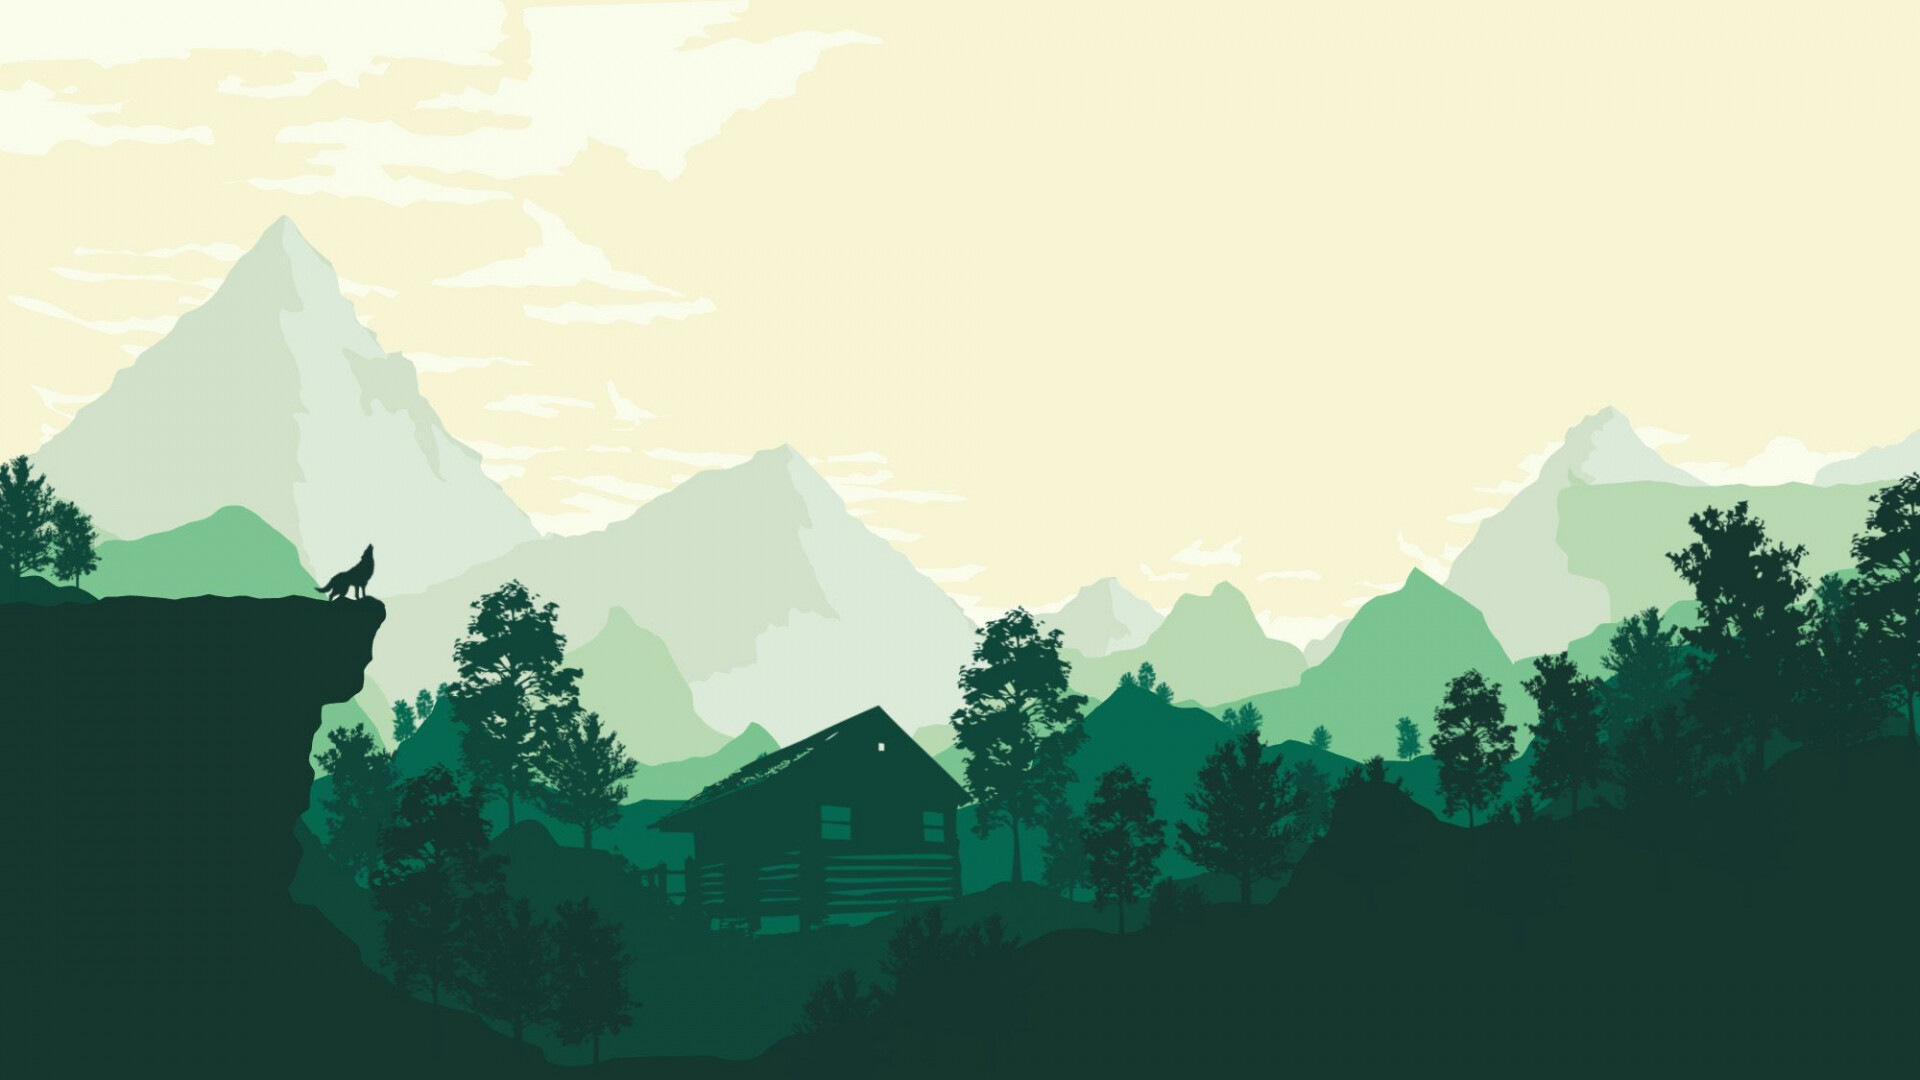 Firewatch: The Wyoming forest that serves as the game’s setting. 1920x1080 Full HD Wallpaper.